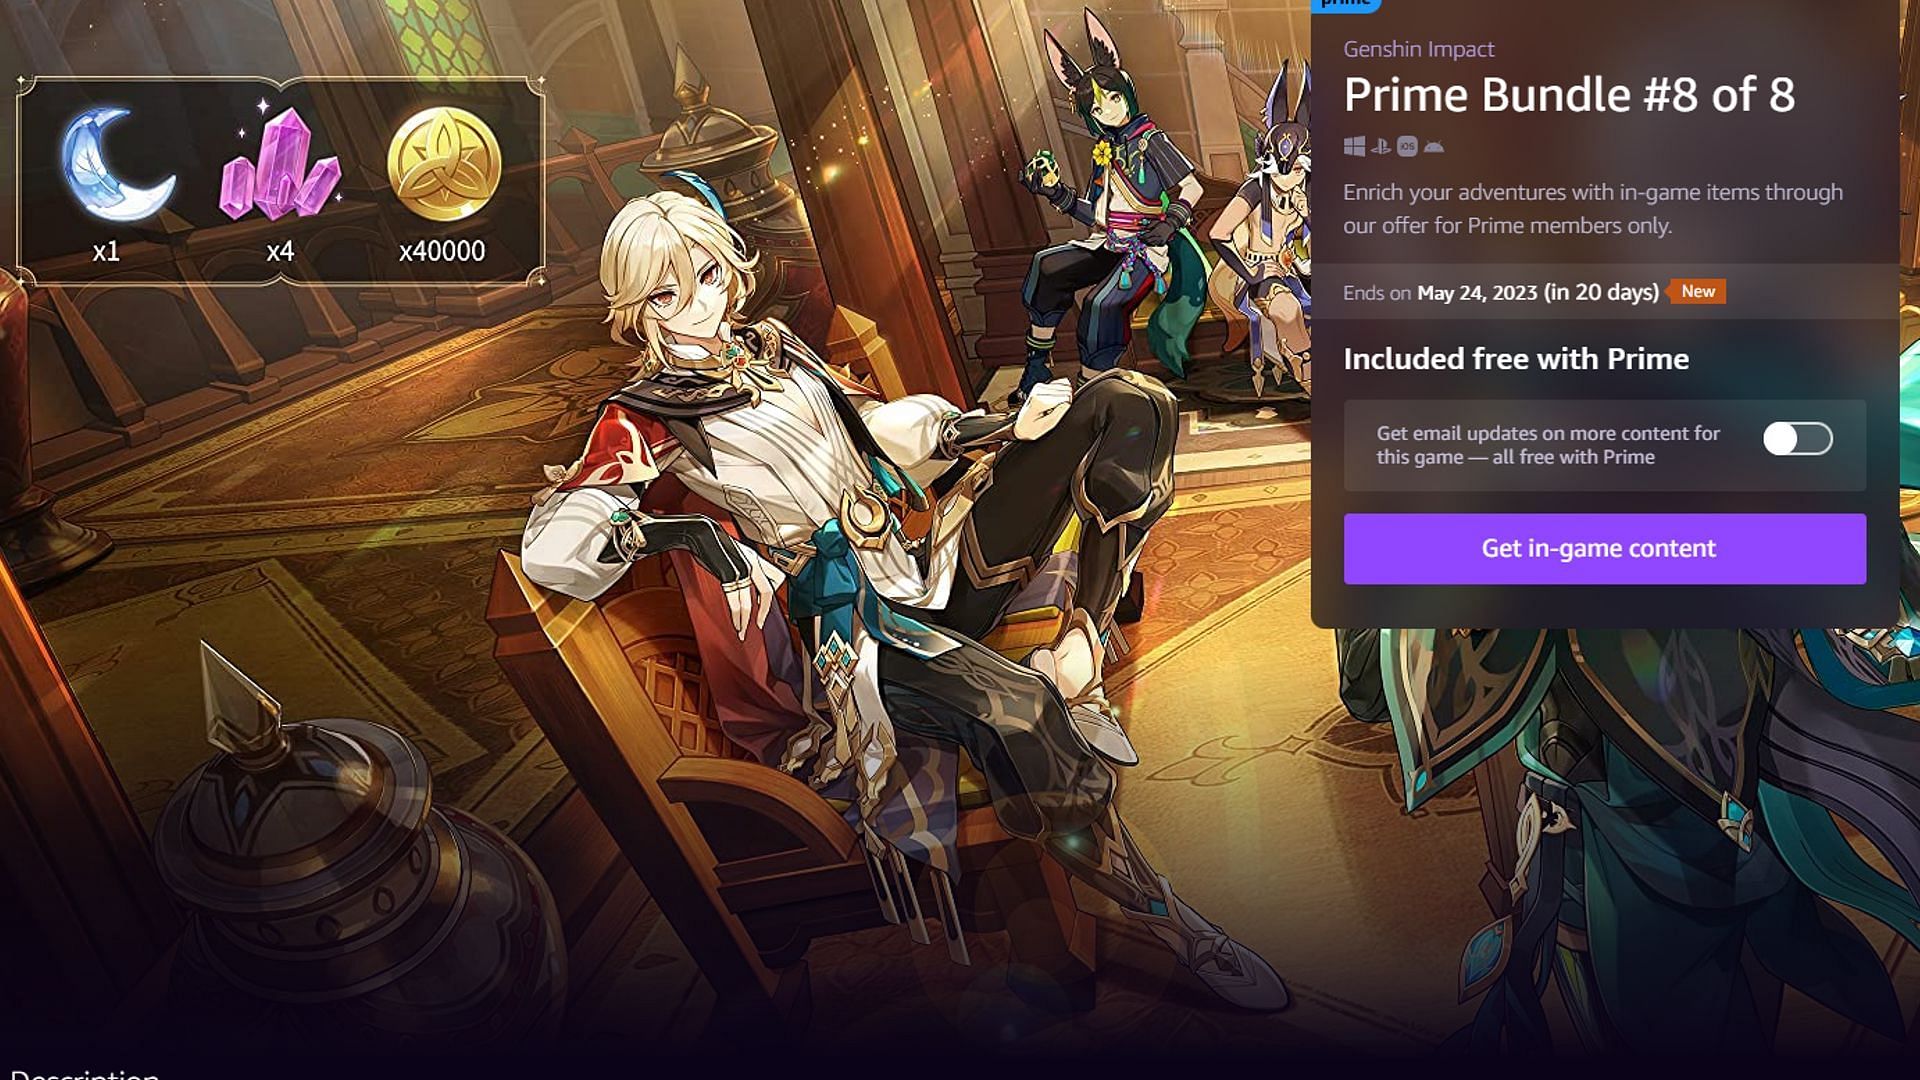 PRIME BUNDLE #2 expires today! (Jan 17) grab it while you still  can!! Genshin Impact